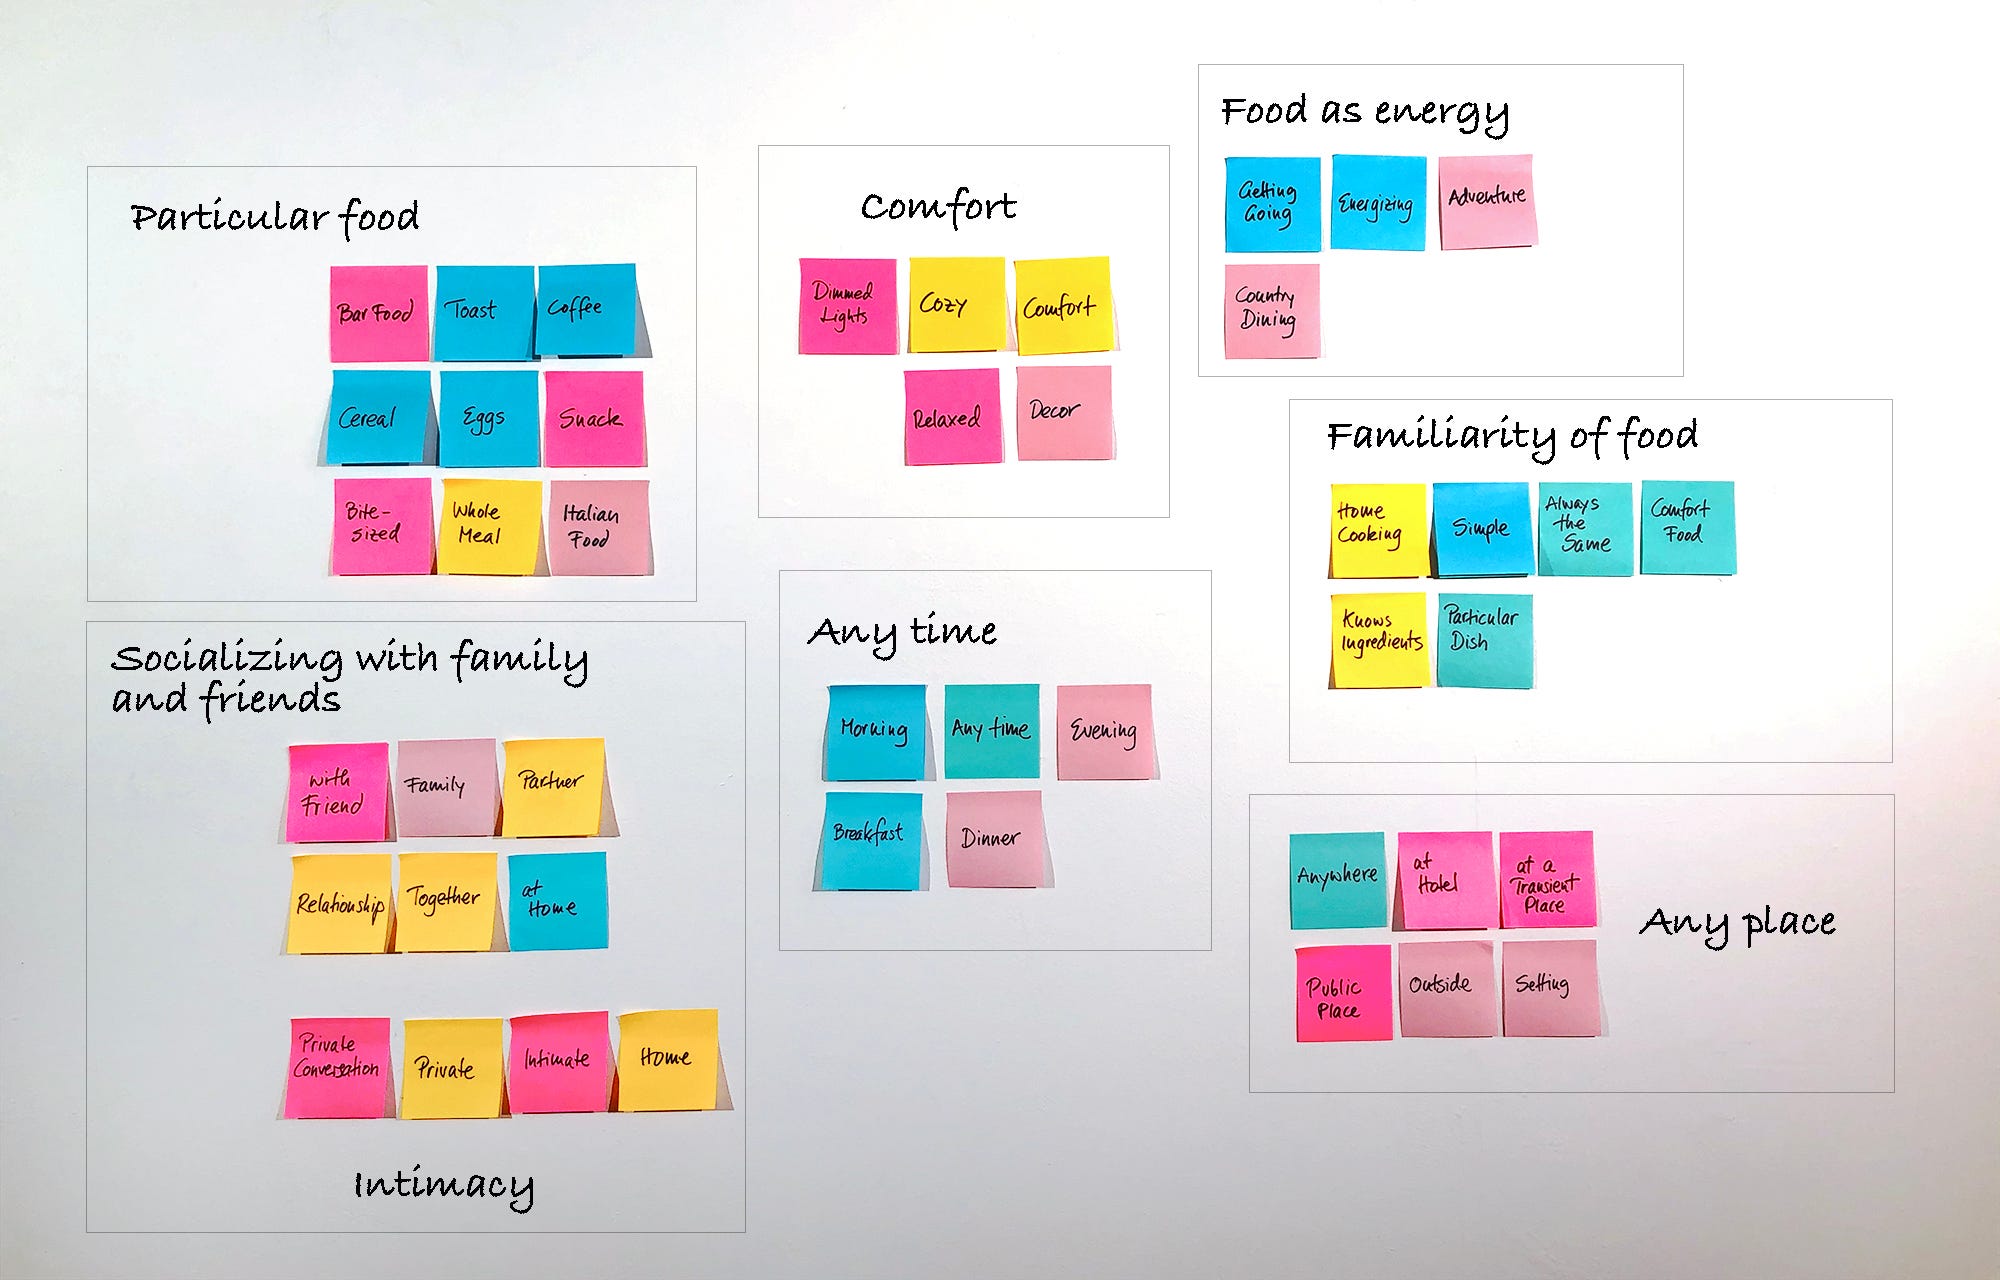 affinity mapping ux case study